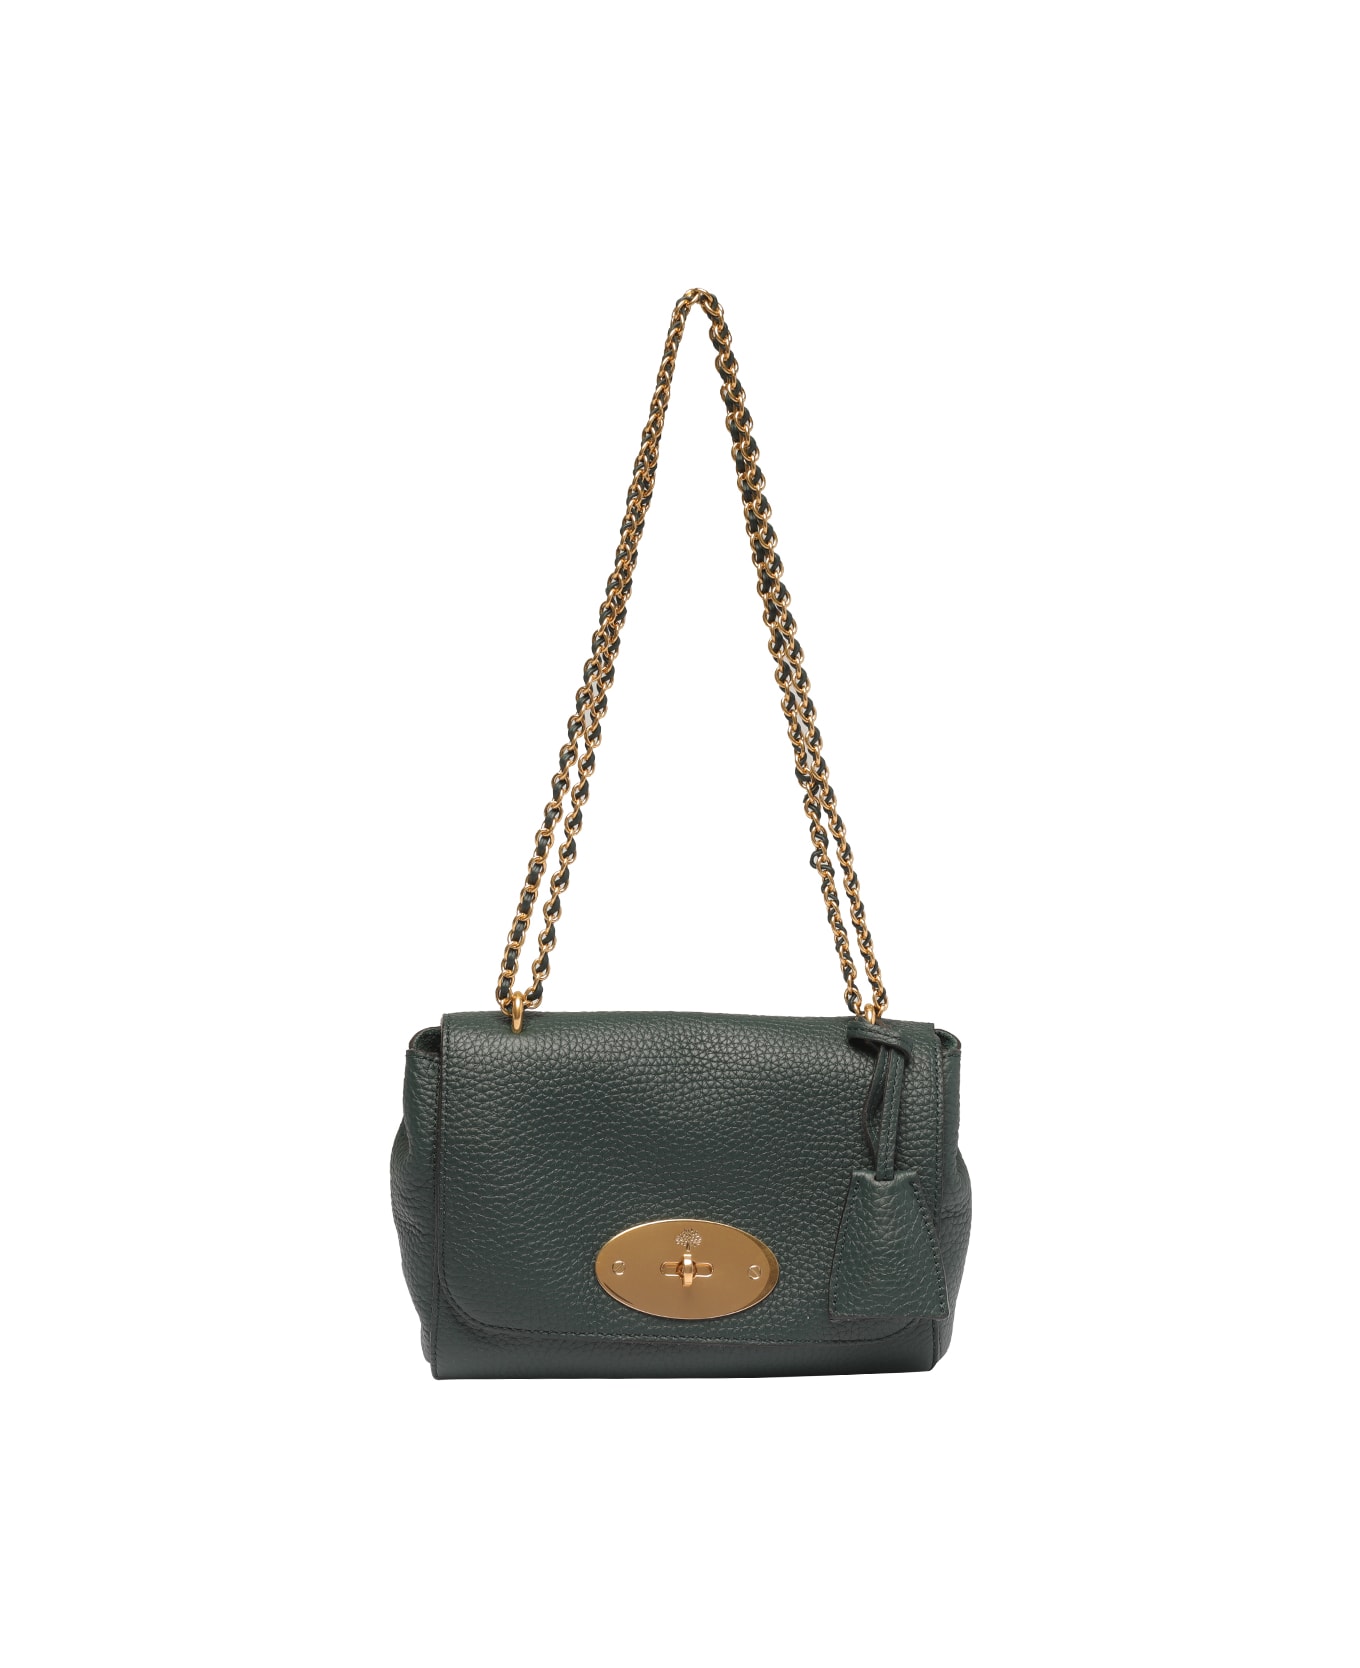 Mulberry Lily Crossbody Bag - Green